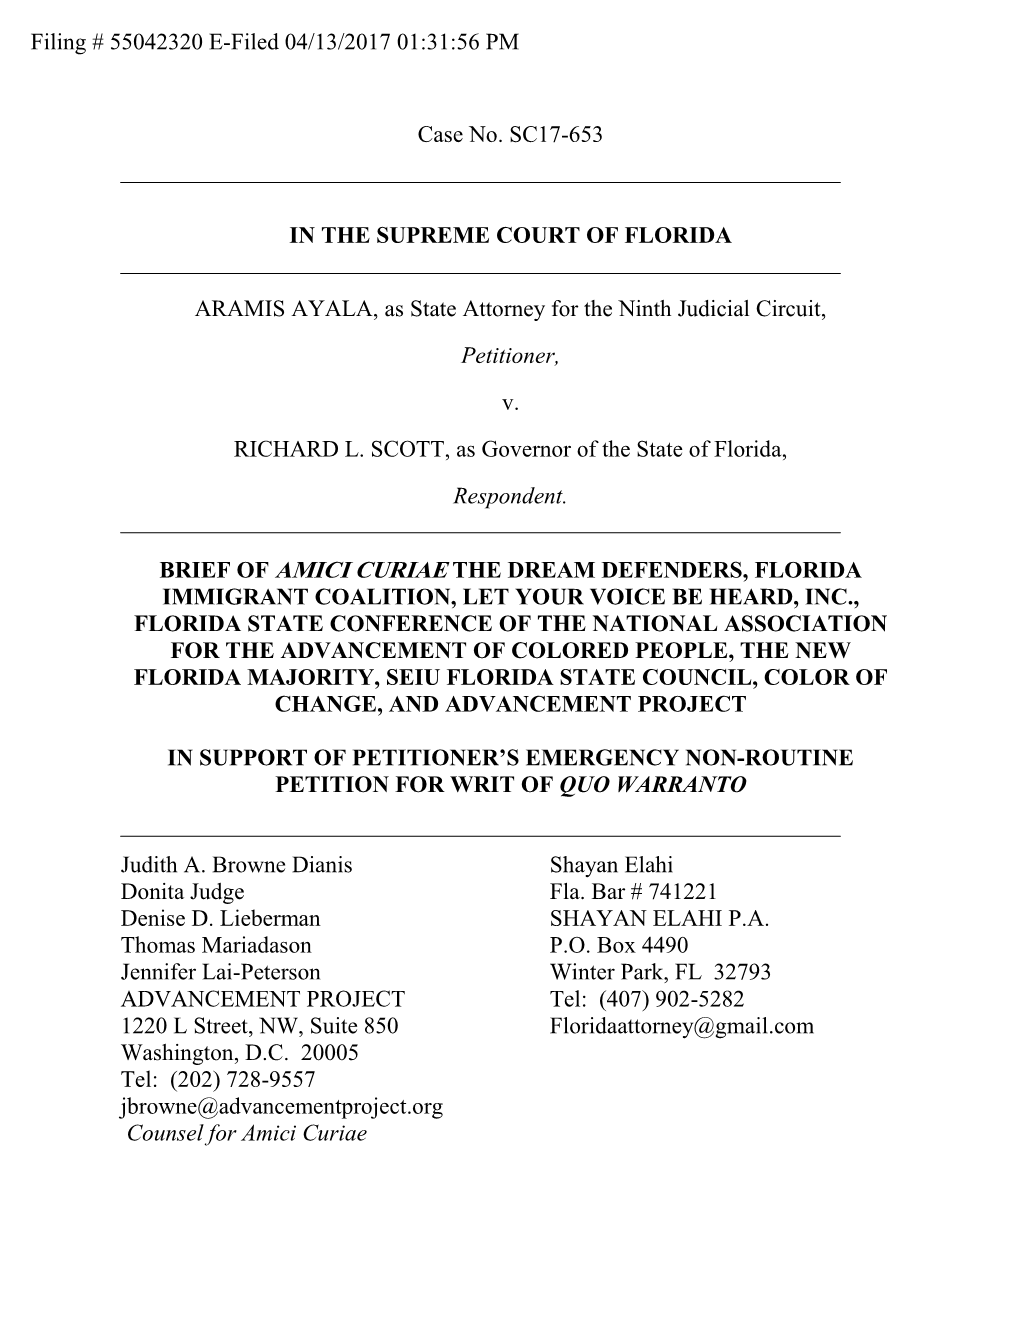 Case No. SC17-653 in the SUPREME COURT of FLORIDA